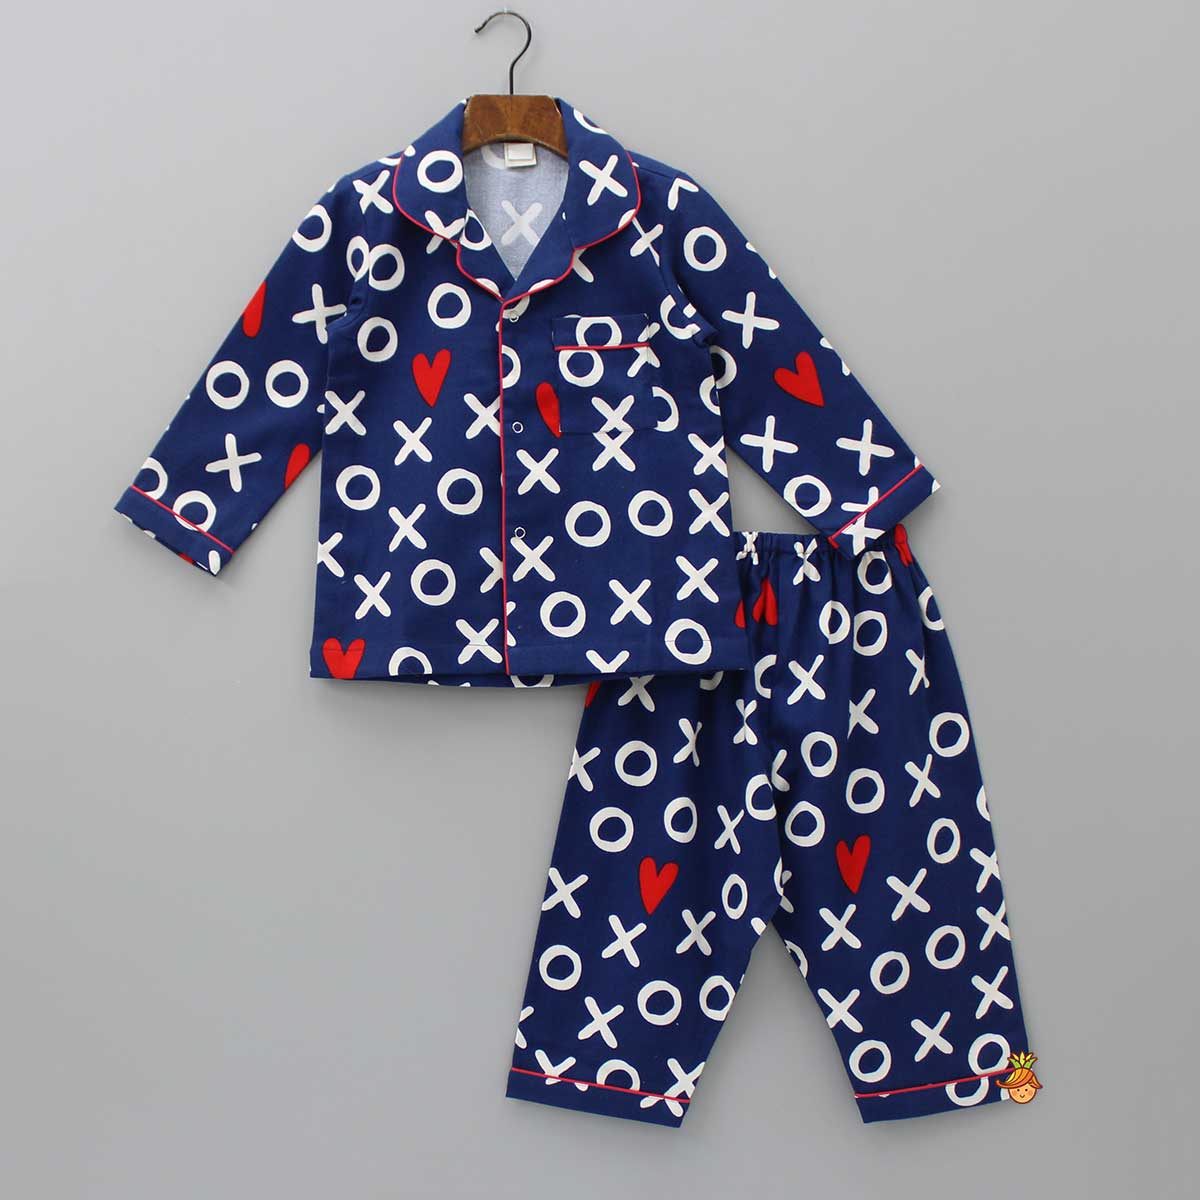 Pre Order: Printed Notch Collared Blue Shirt With Pyjama